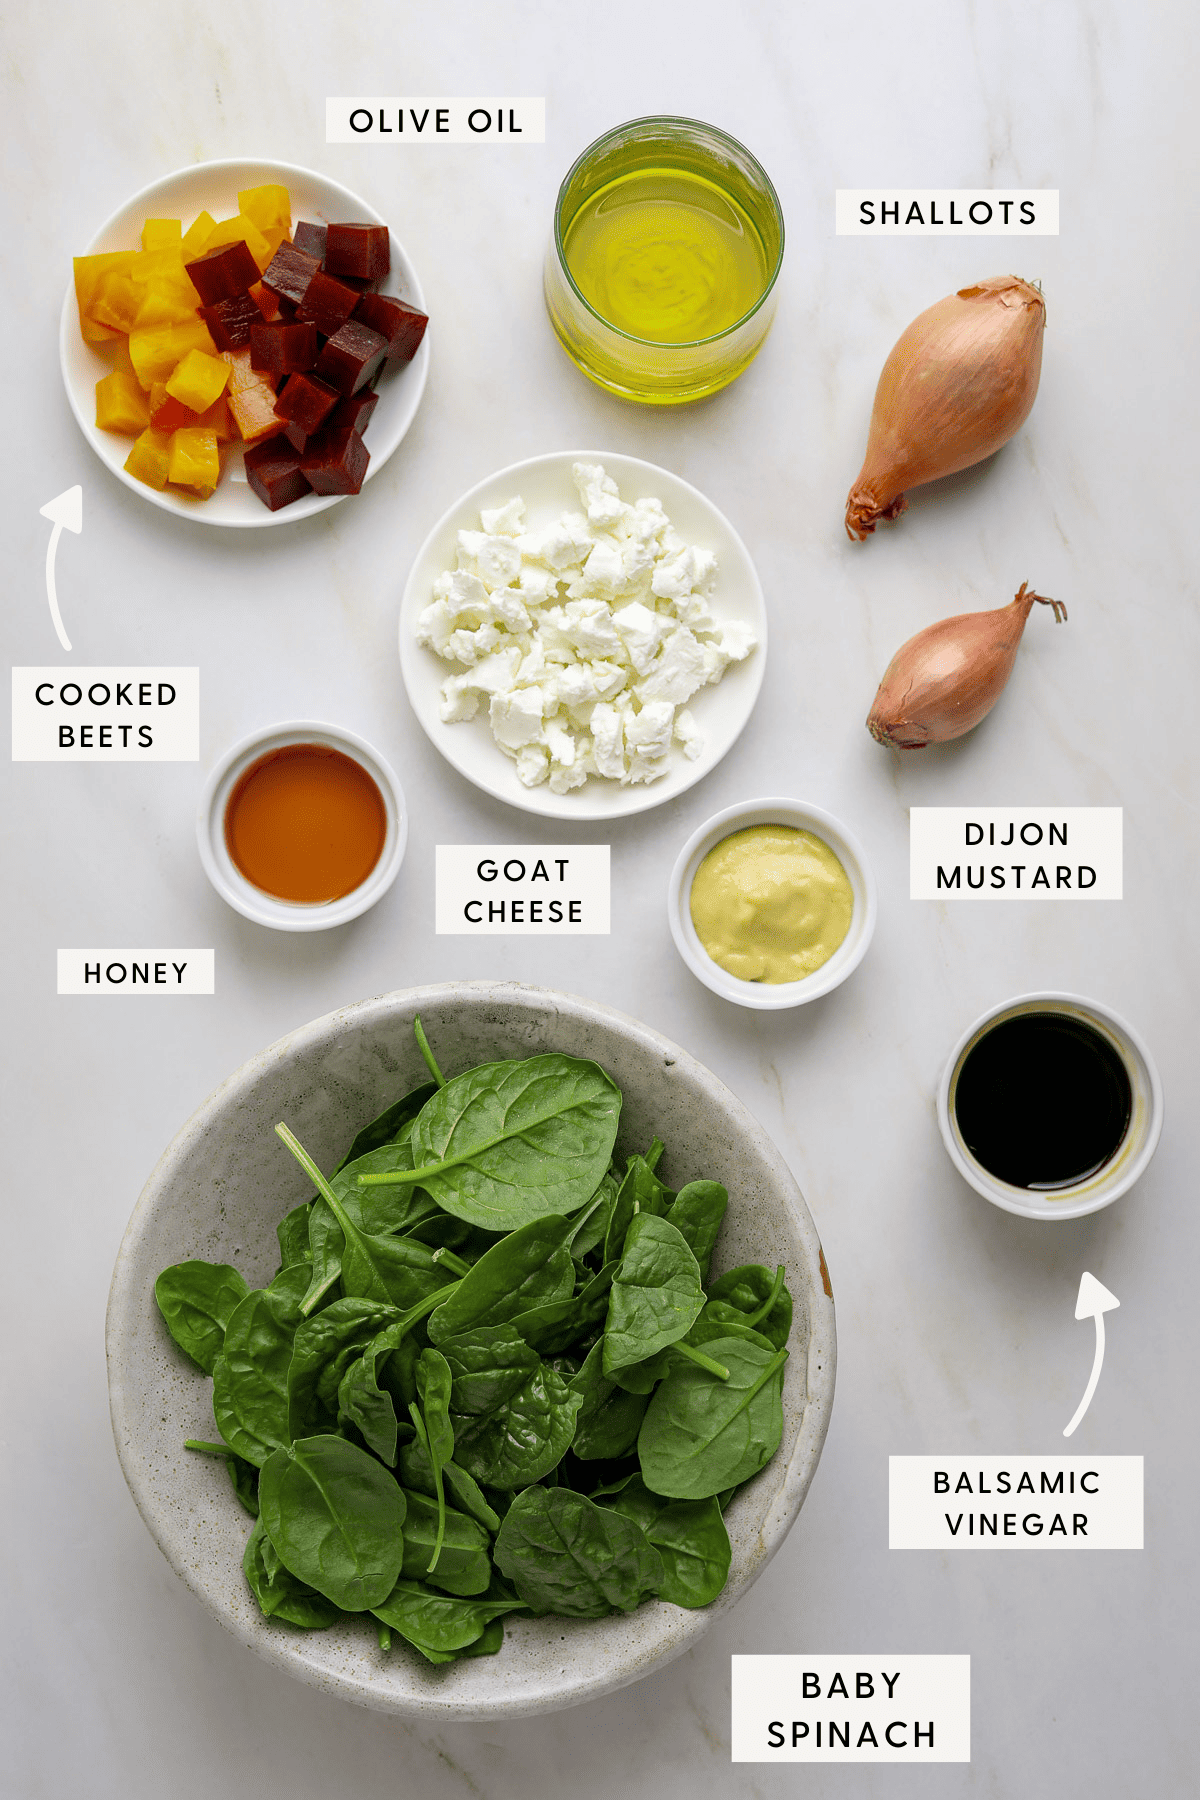 Recipe ingredients portioned into individual bowls; balsamic vinegar, spinach, shallots, olive oil and cooked beets.